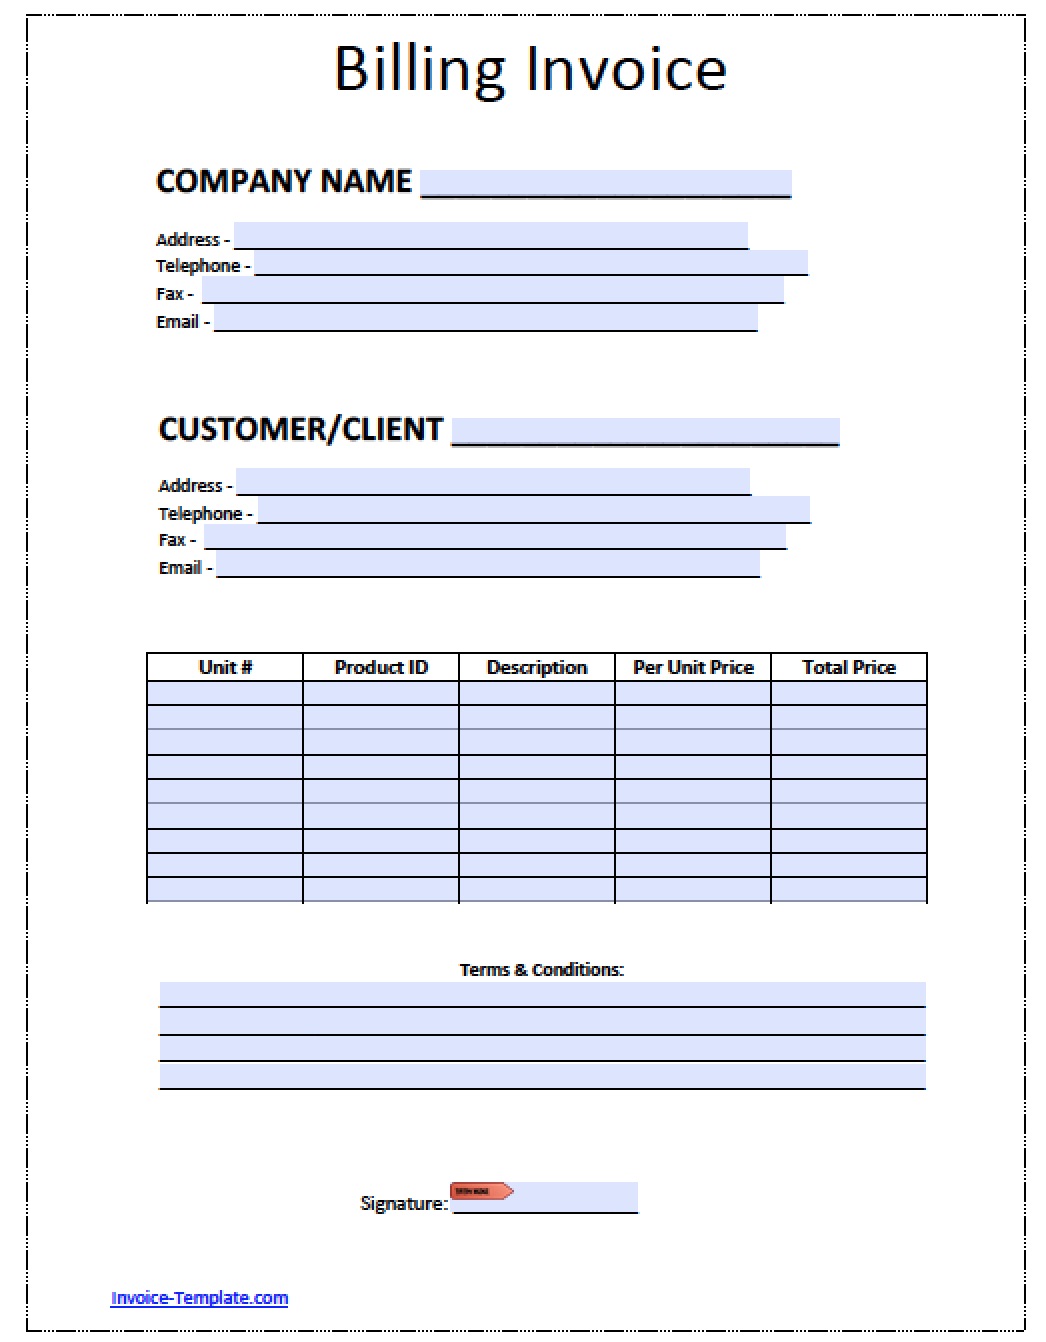 Free Blank Invoice Template for Excel